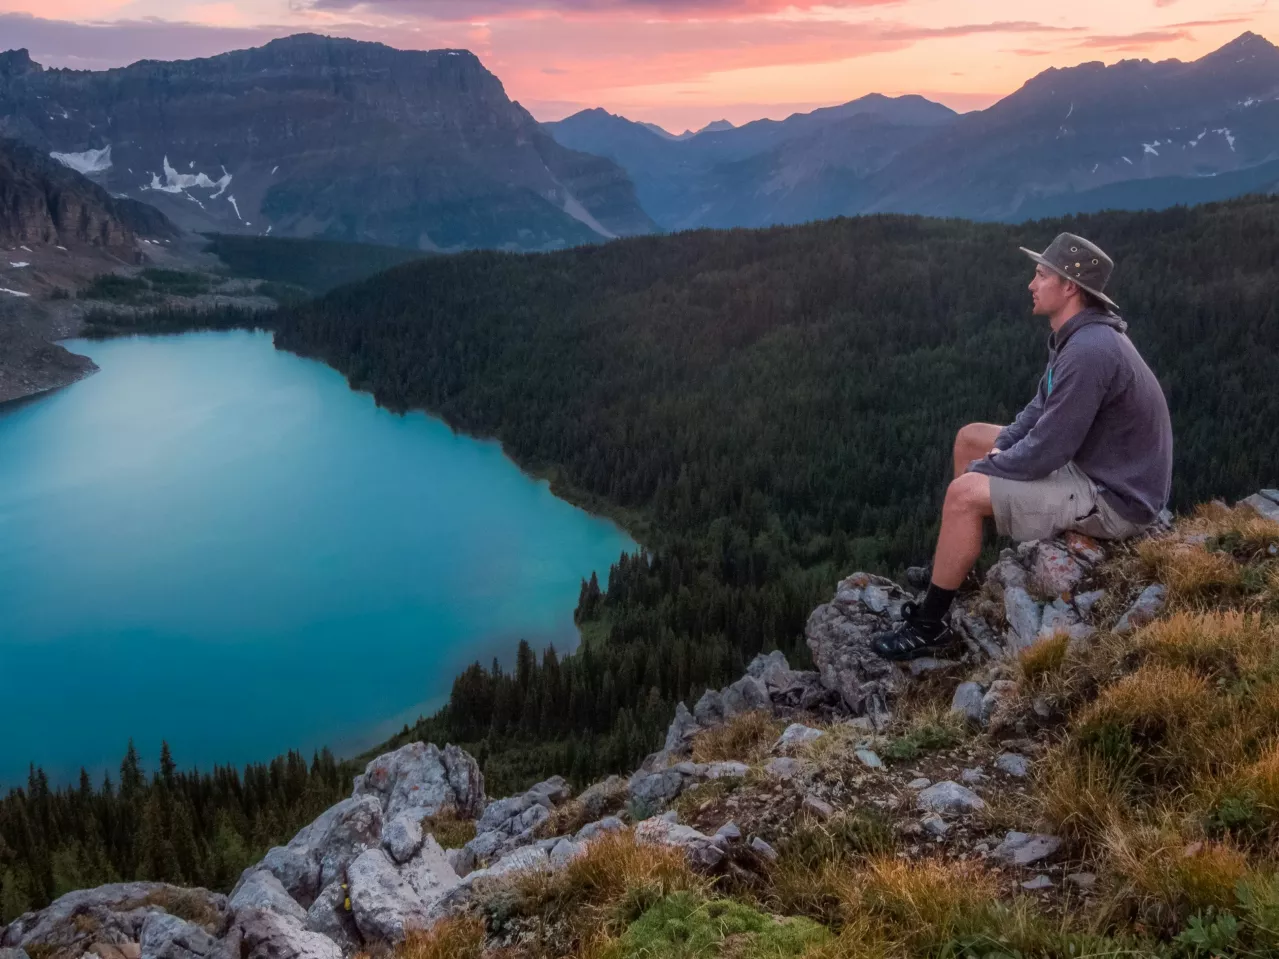 A person wearing a hat, gray hoodie, and shorts sits on a rocky ledge overlooking a blue lake surrounded by dense forest and mountains. The sun is setting in the background, casting a warm glow across the sky.